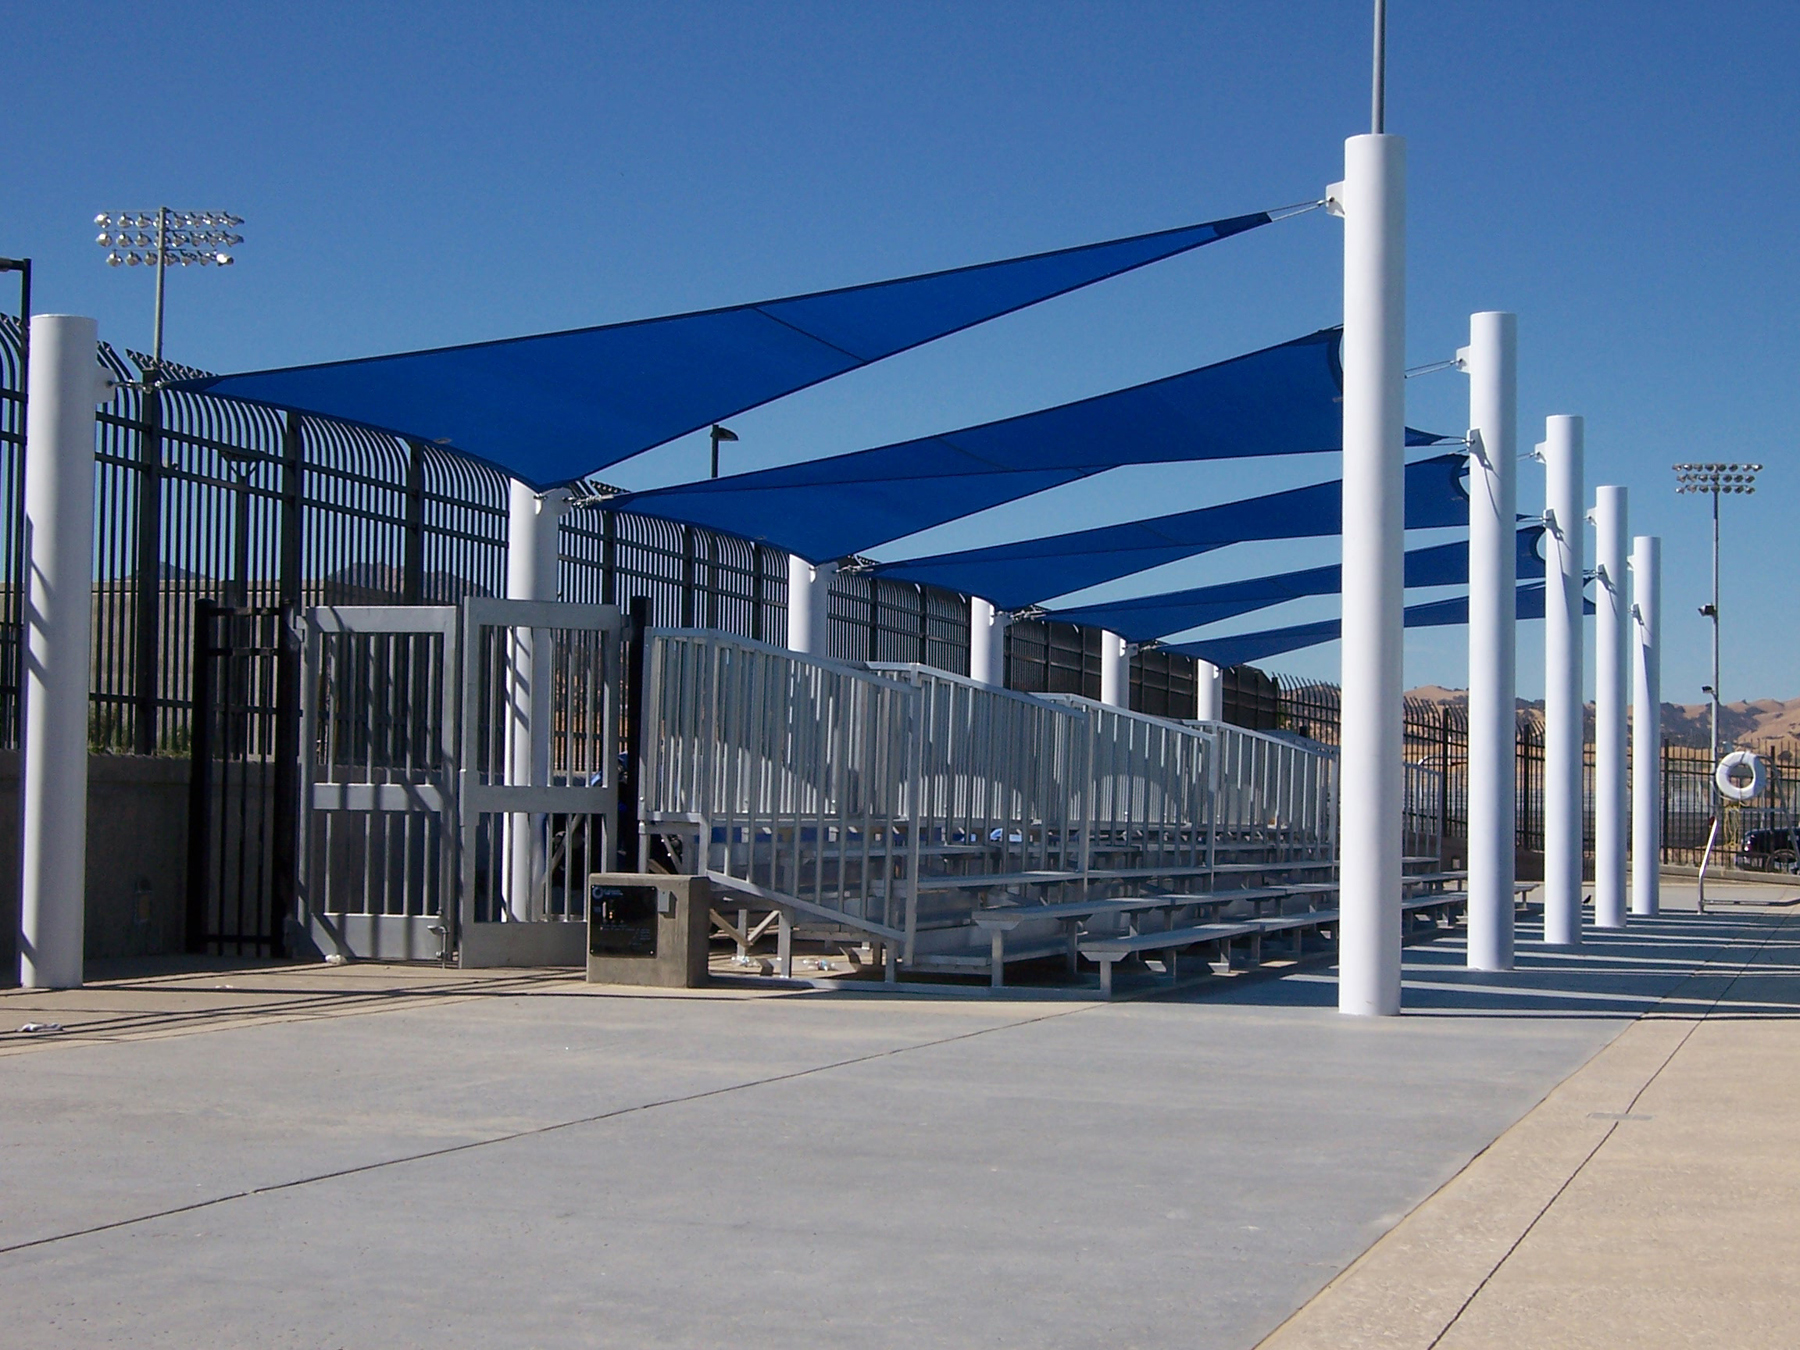 blue shades covering outdoor bleachers